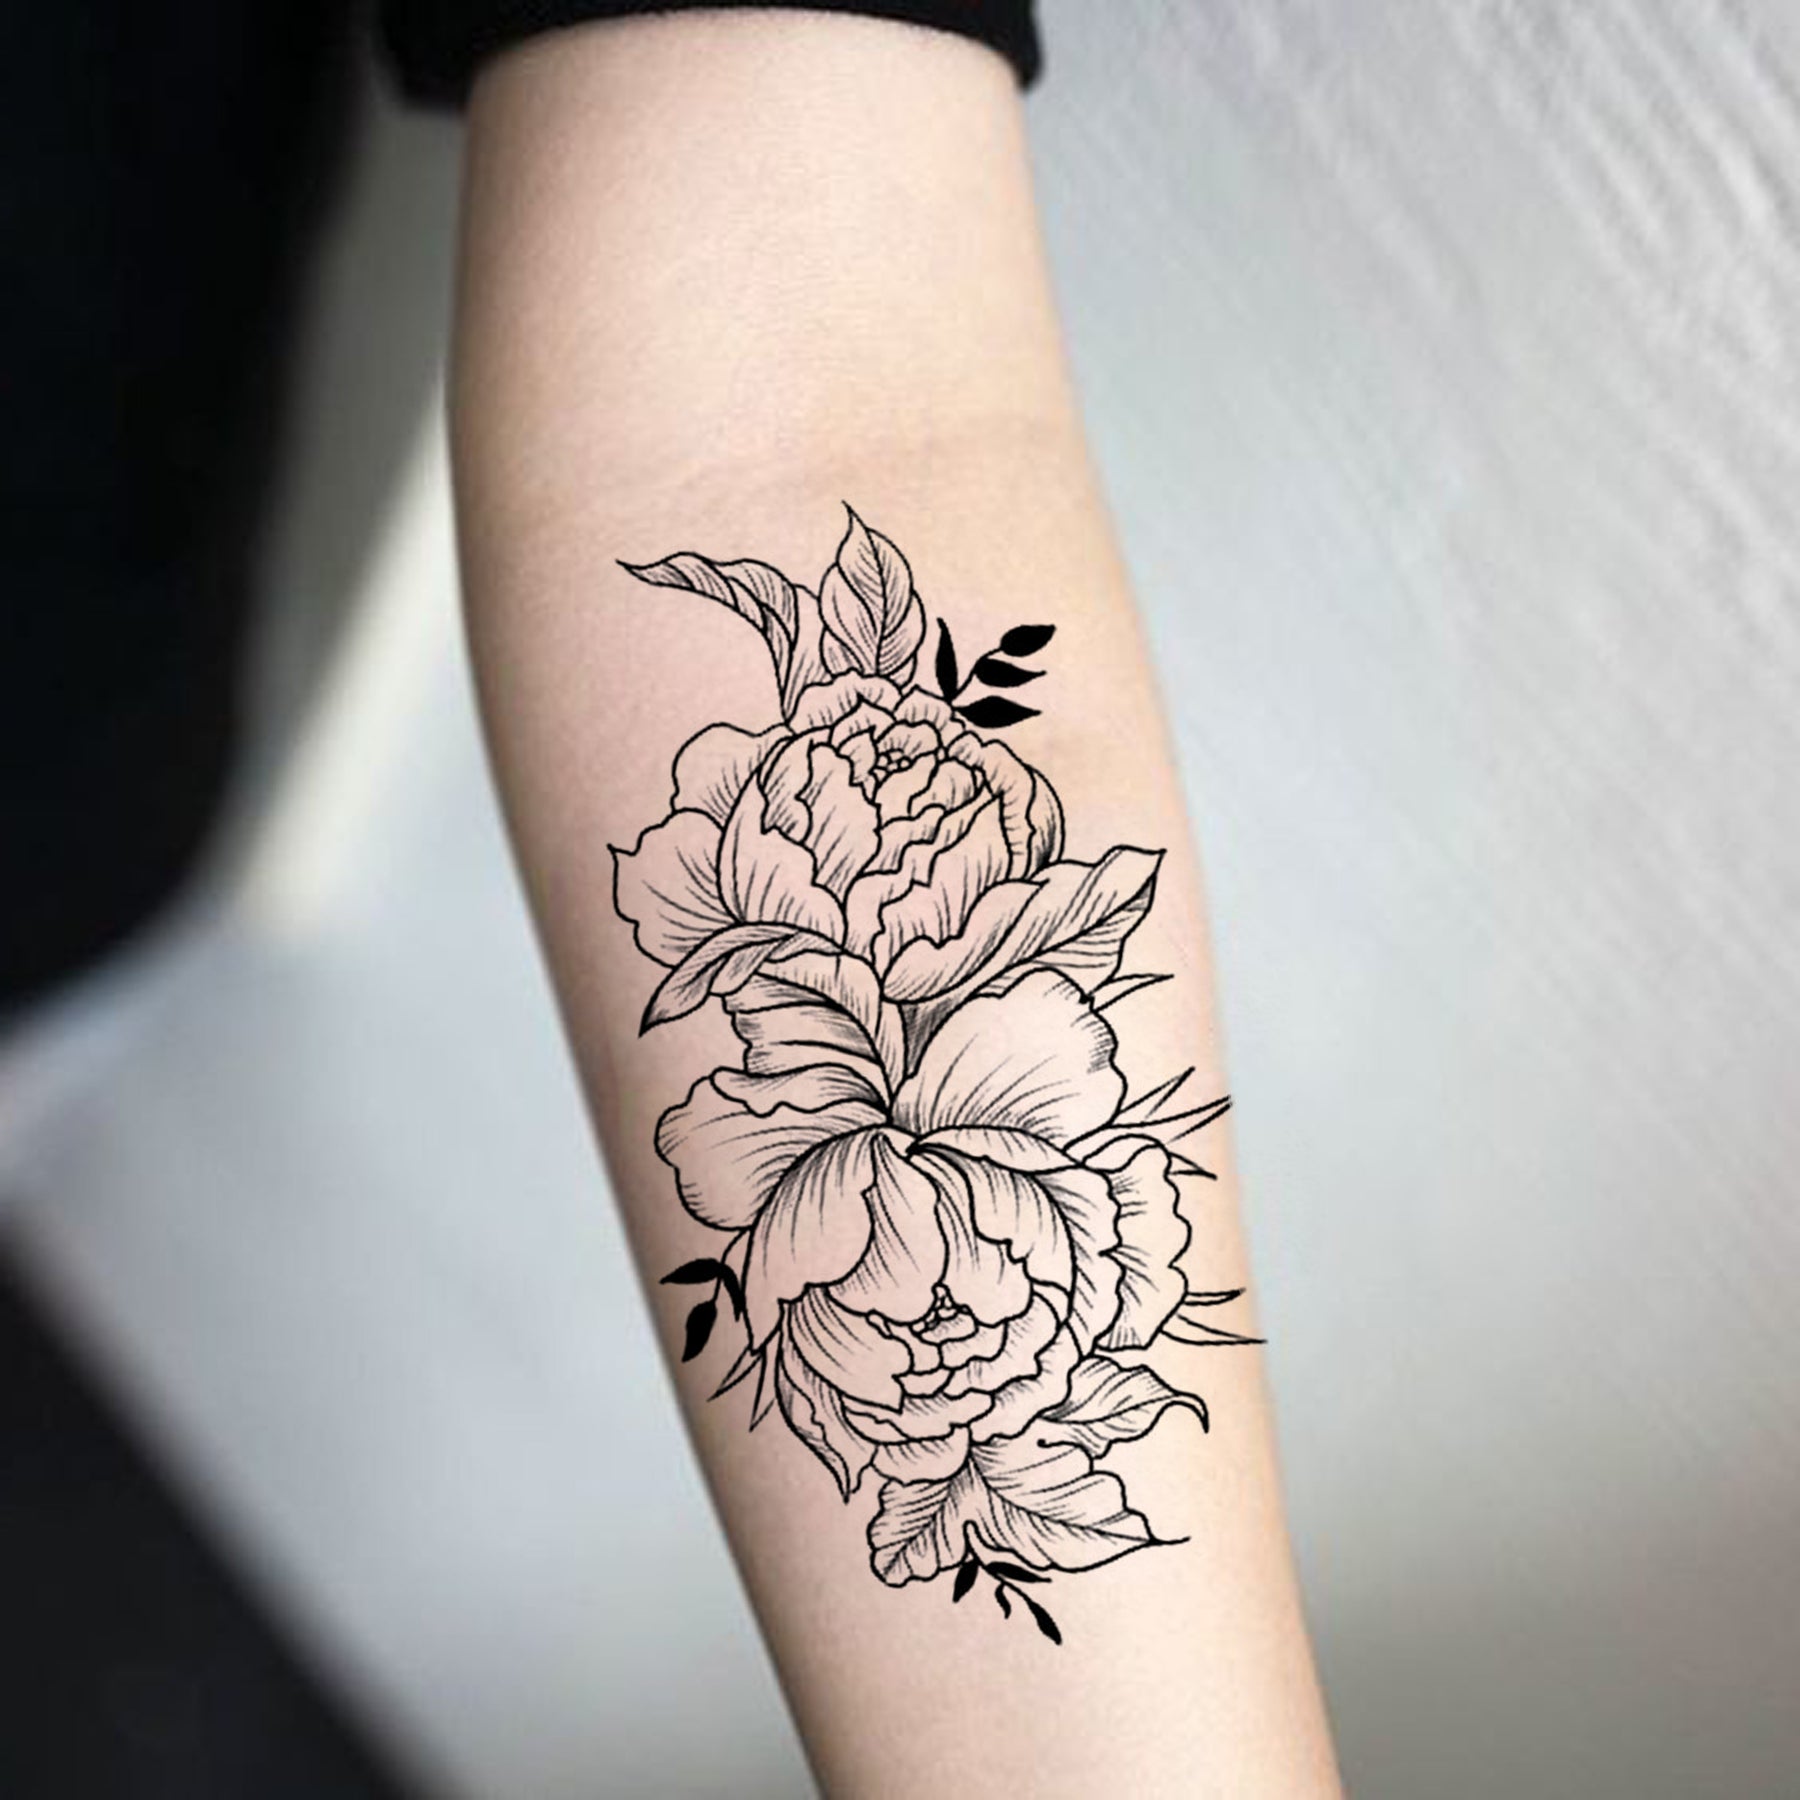 What is the cost of a good-looking forearm tattoo? - Quora